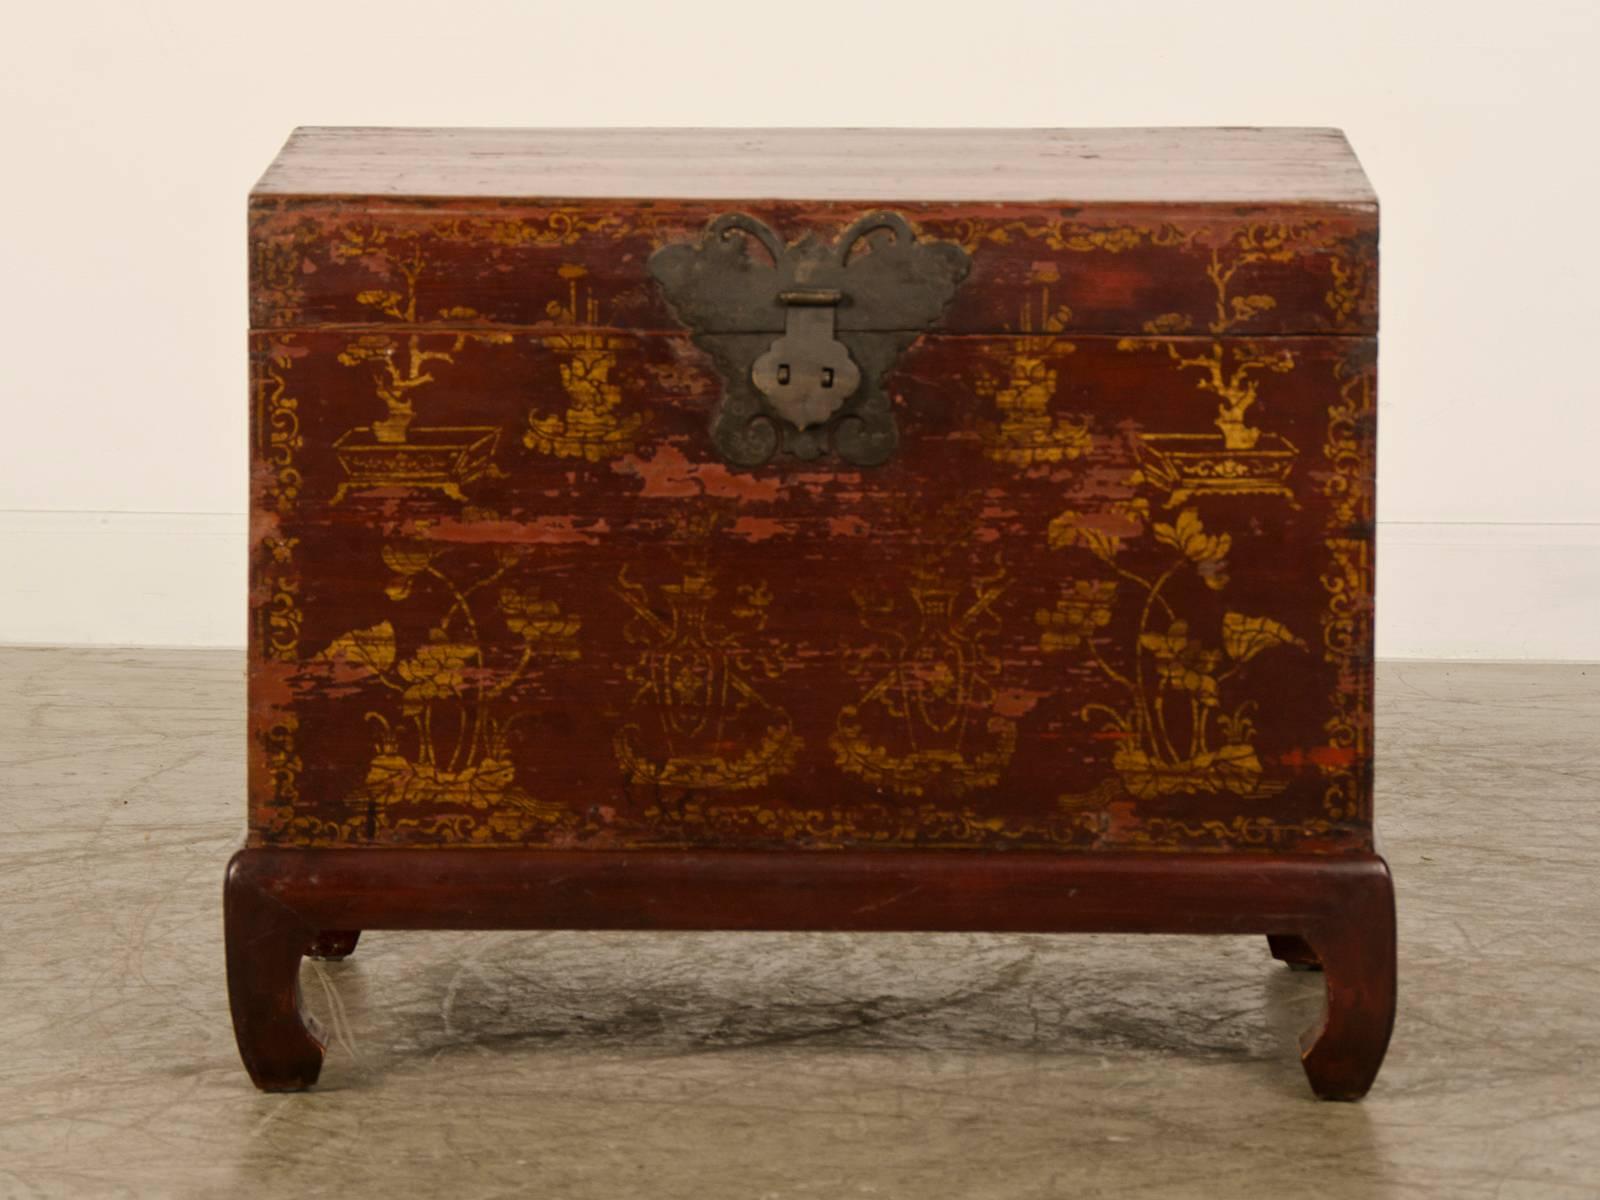 Red Lacquer Antique Chinese Trunk Kuang Hsu Period, circa 1875 In Excellent Condition For Sale In Houston, TX